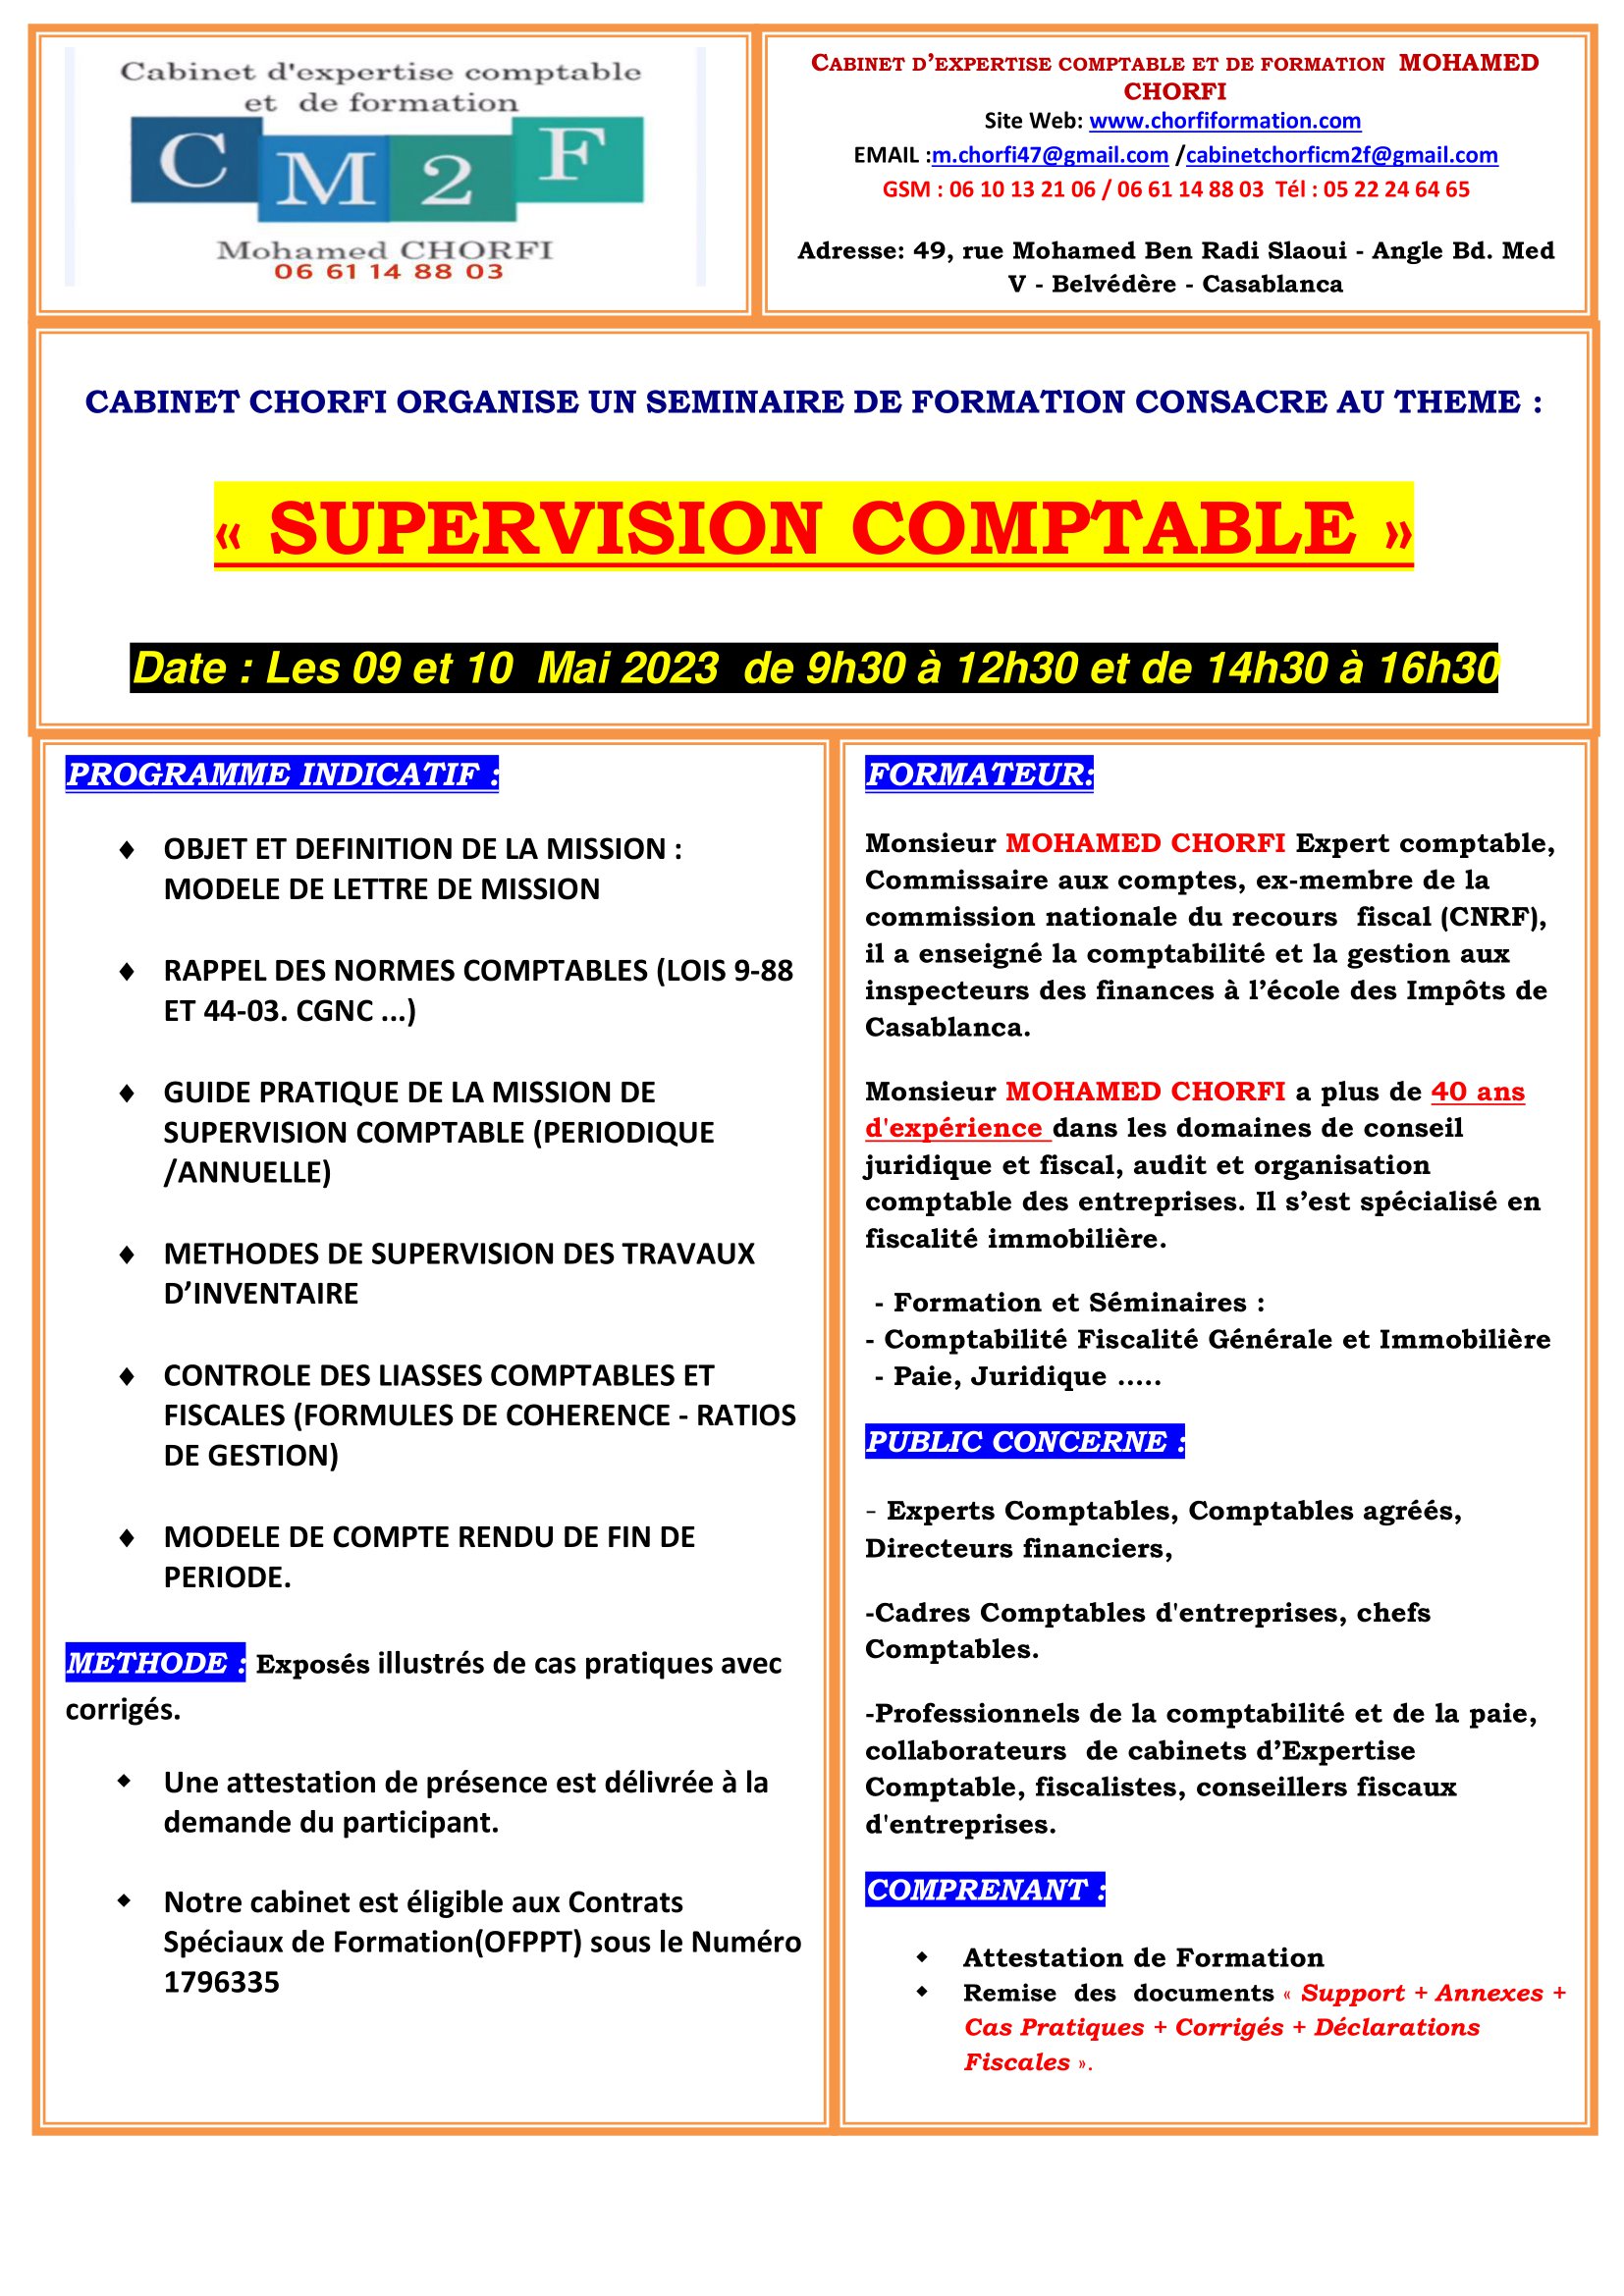 01-SEMINAIRE Supervision comptable